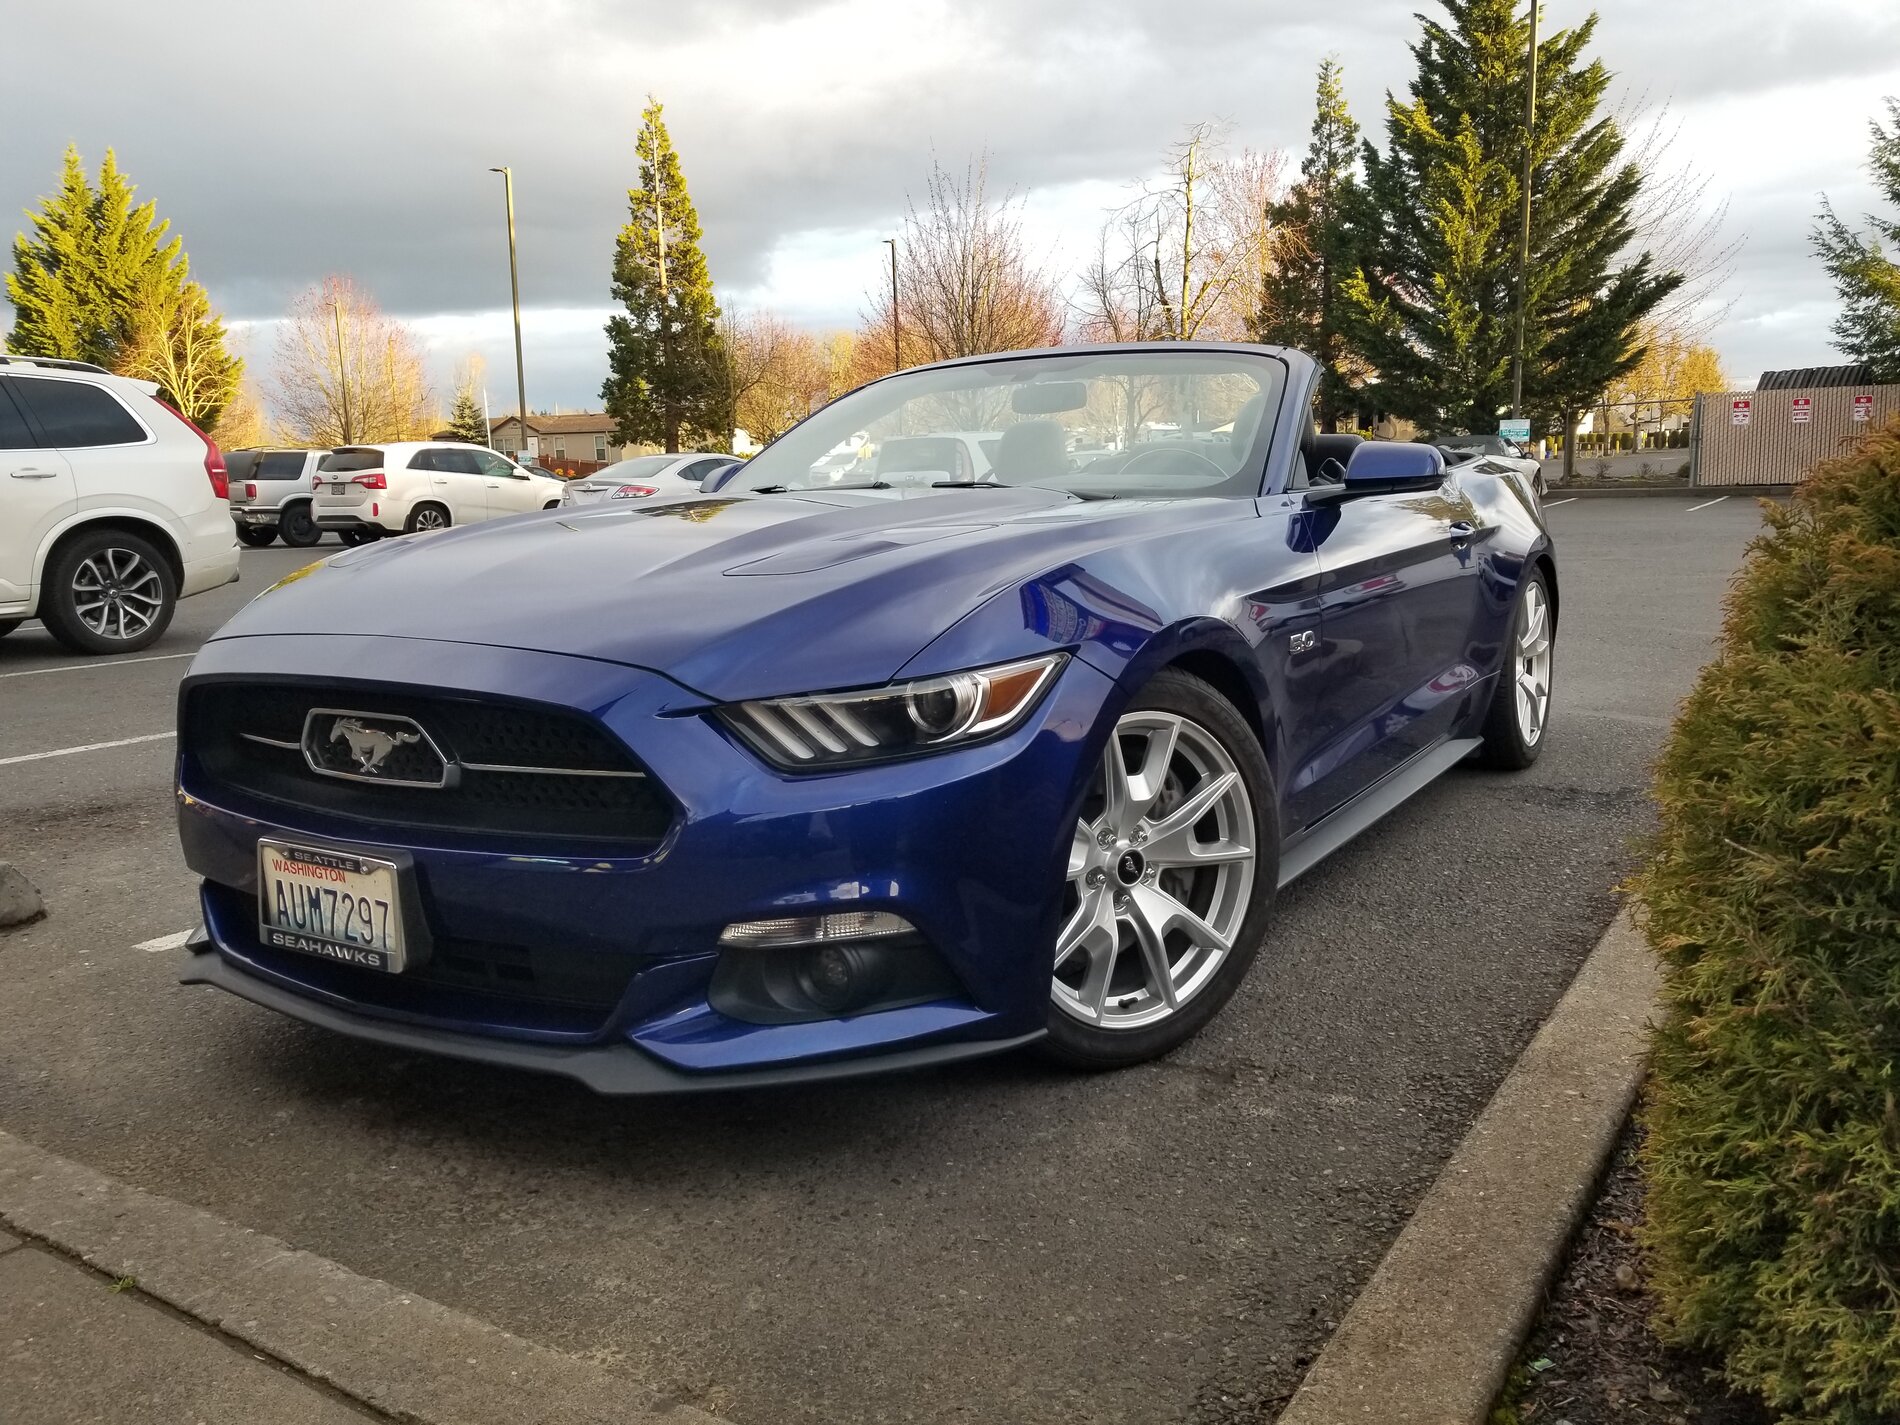 S650 Mustang Post Pictures of Your Car LoweredStan